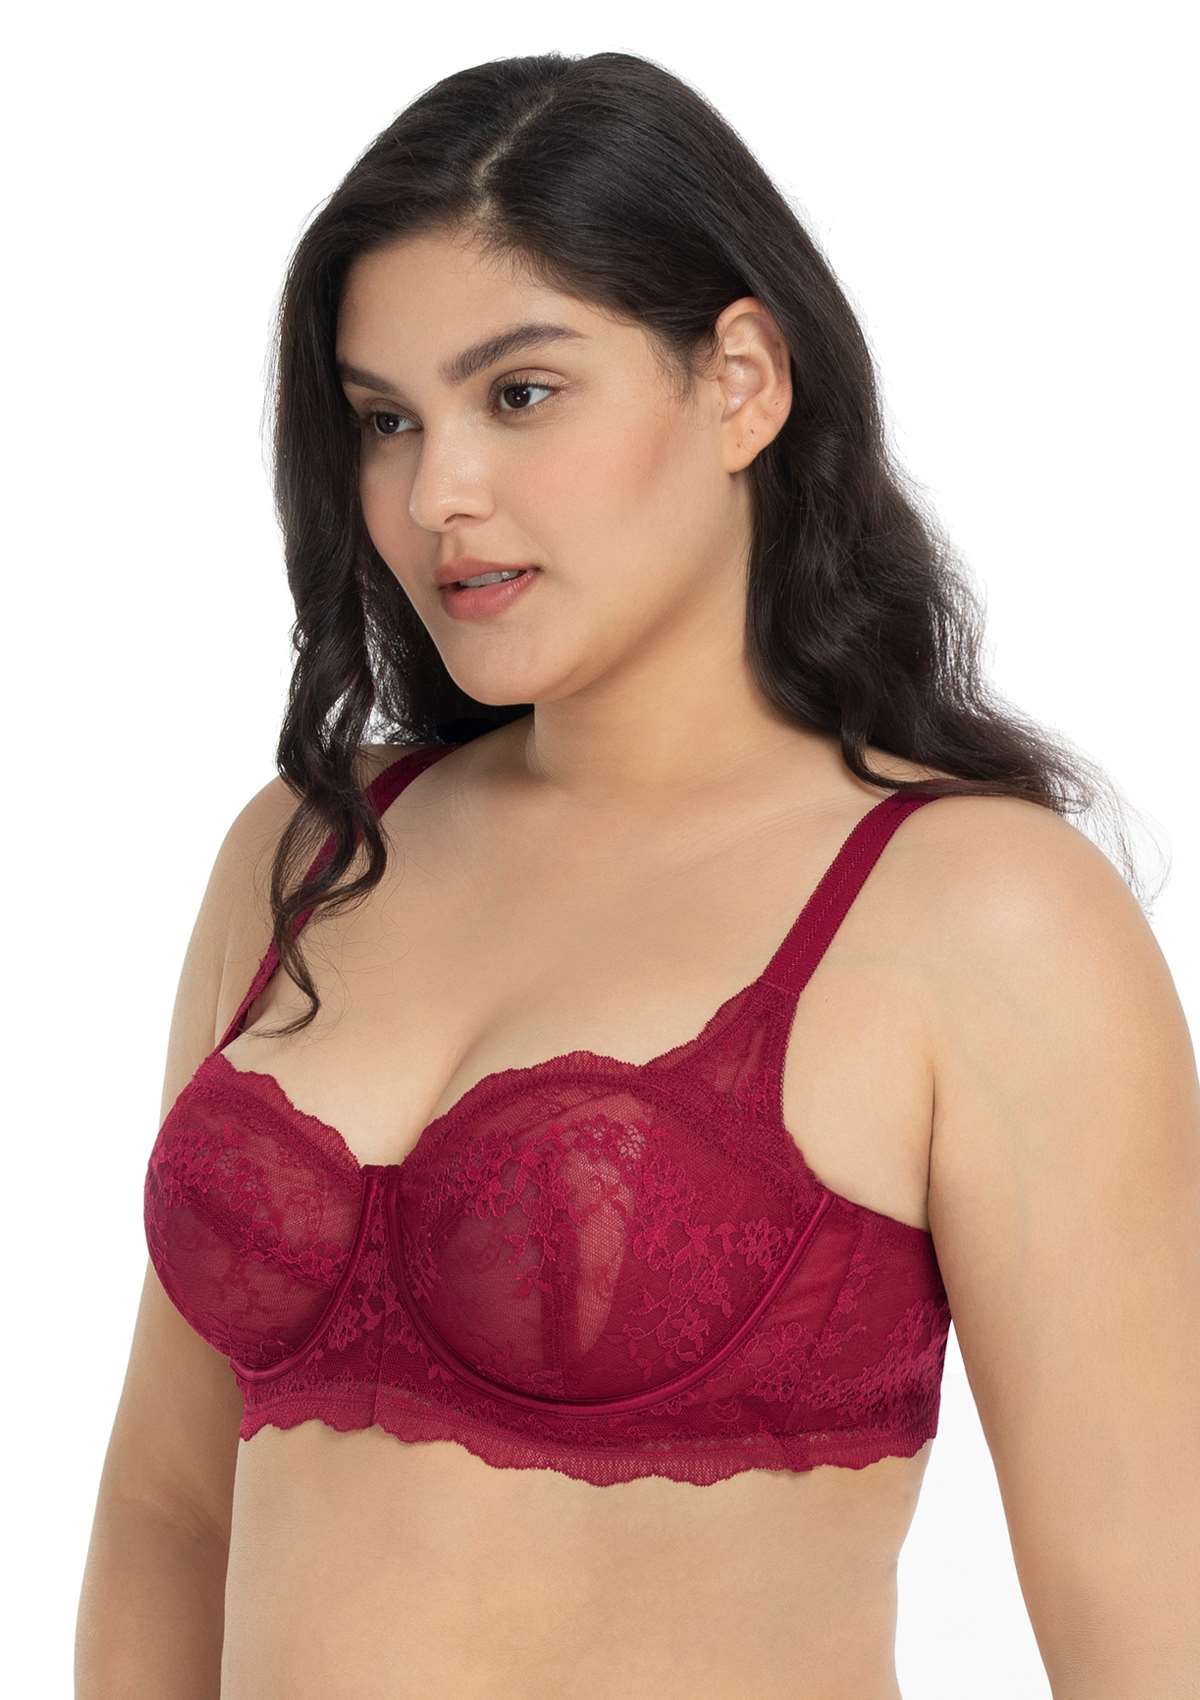 HSIA Floral Lace Unlined Bridal Balconette Bra Set - Supportive Classic - Burgundy / 34 / D